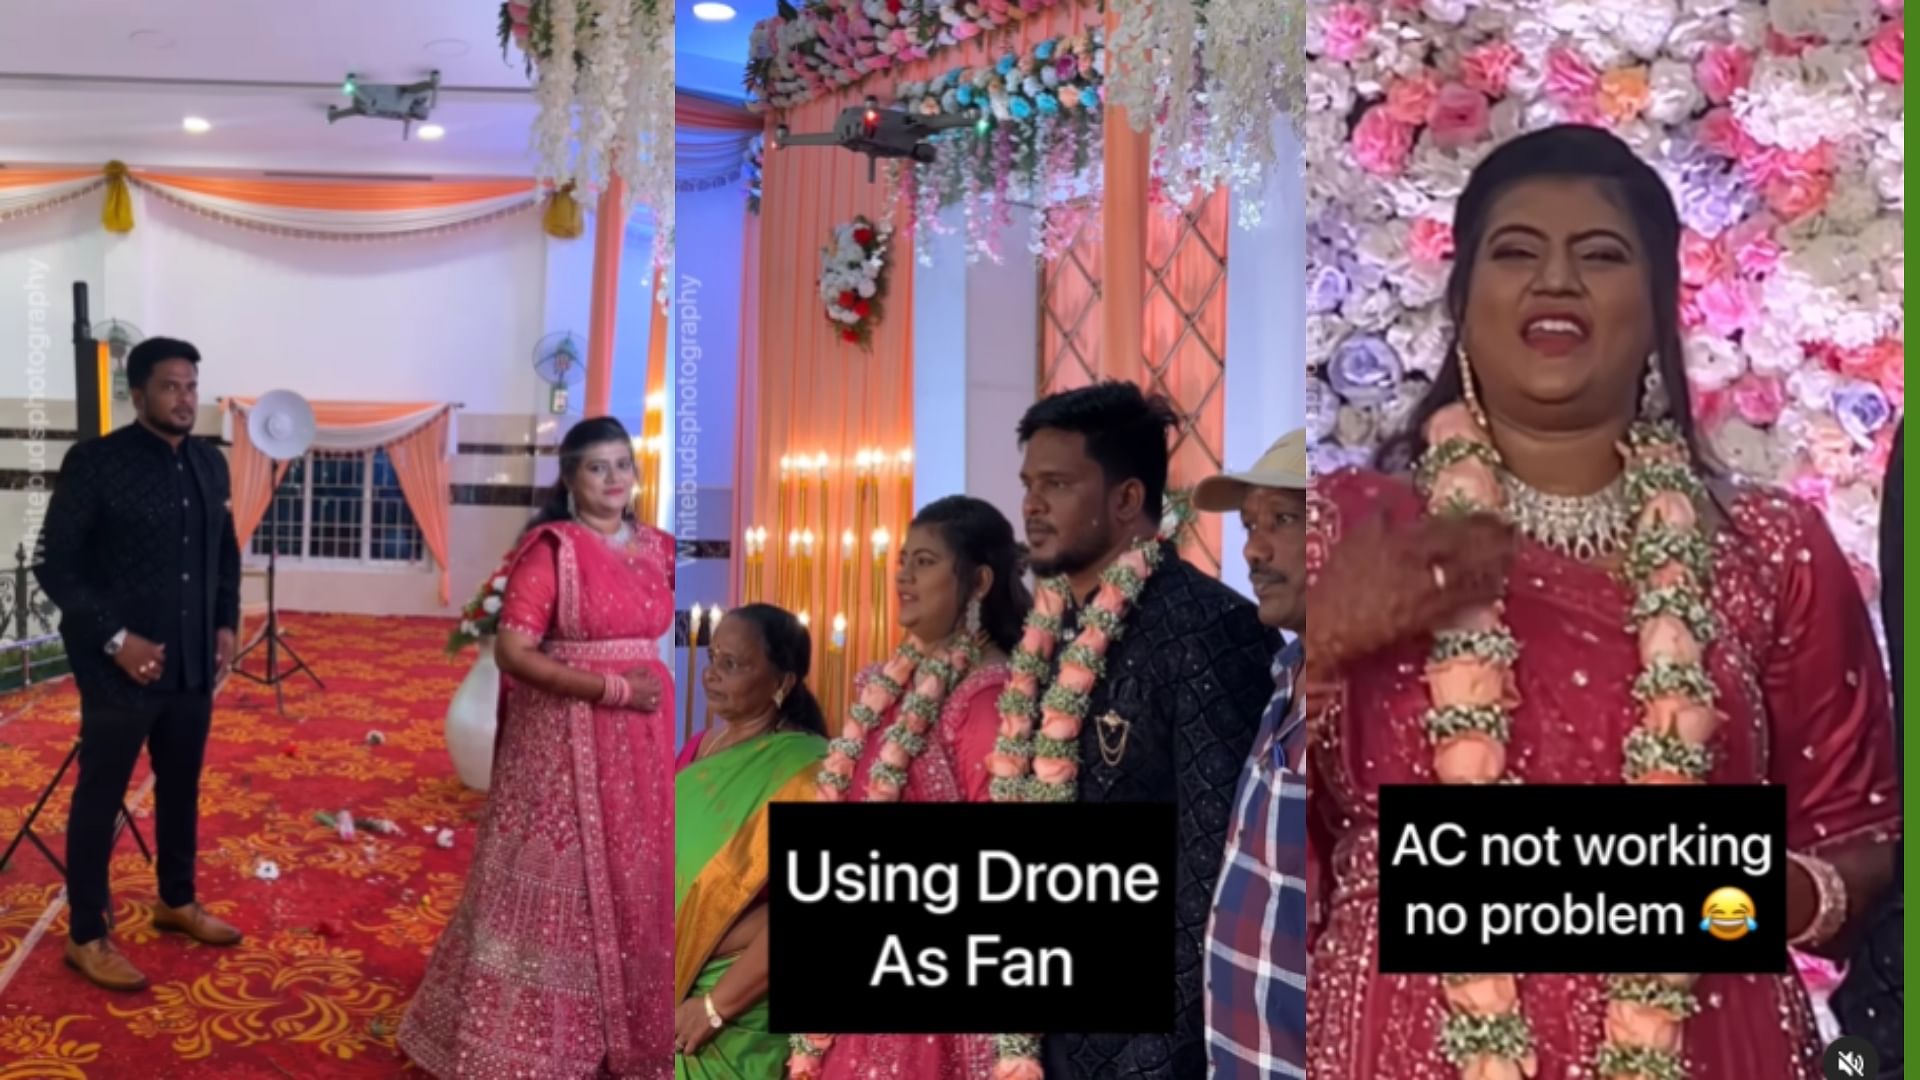 Jugaad Viral Video drone flying over bride in wedding when ac stopped working